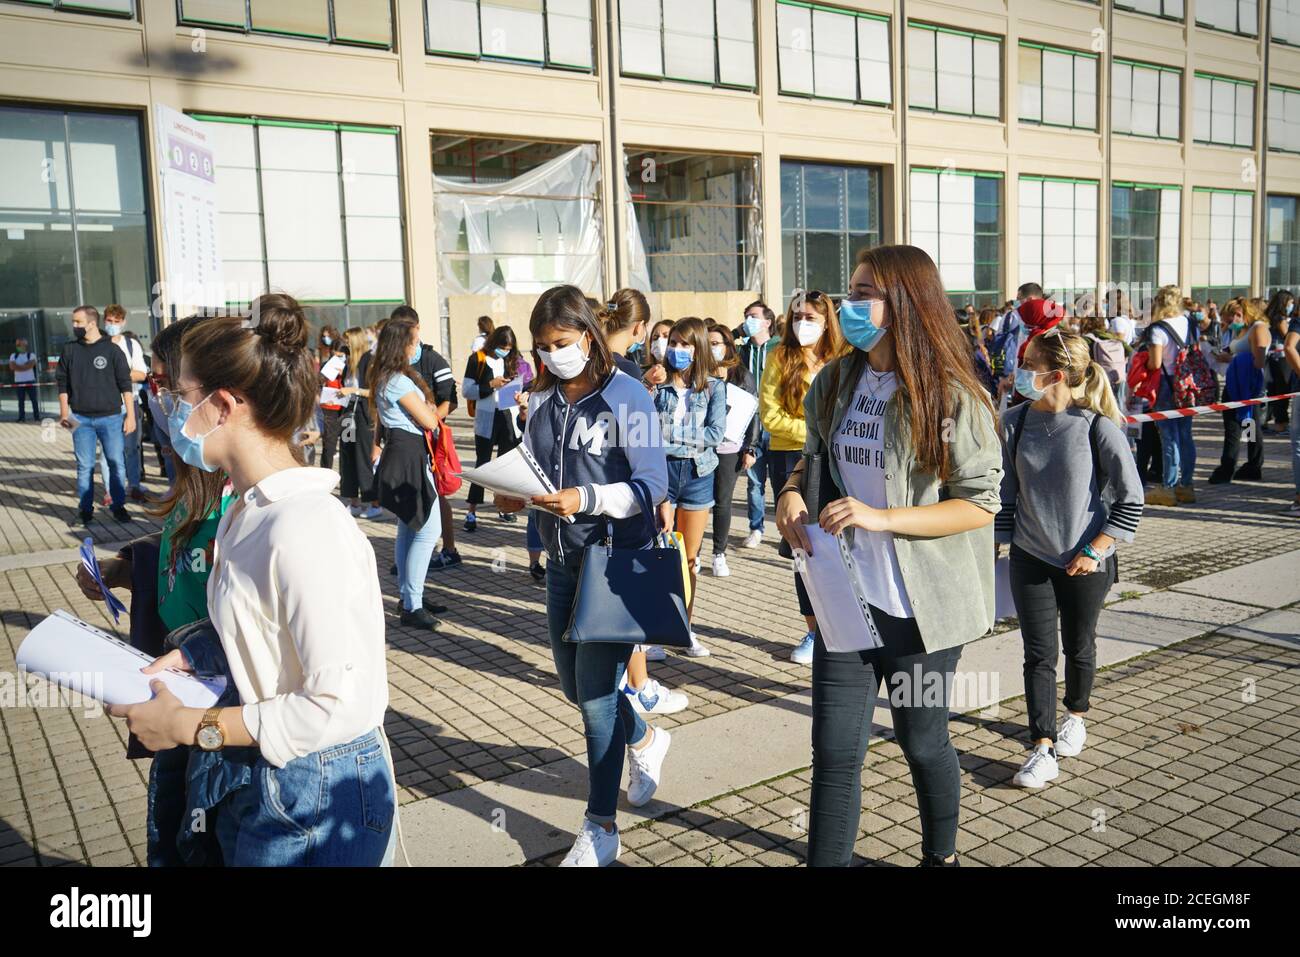 Students queuing at the school entrance wearing mask face to prevent infection or respiratory illness. Turin, Italy - September 2020 Stock Photo